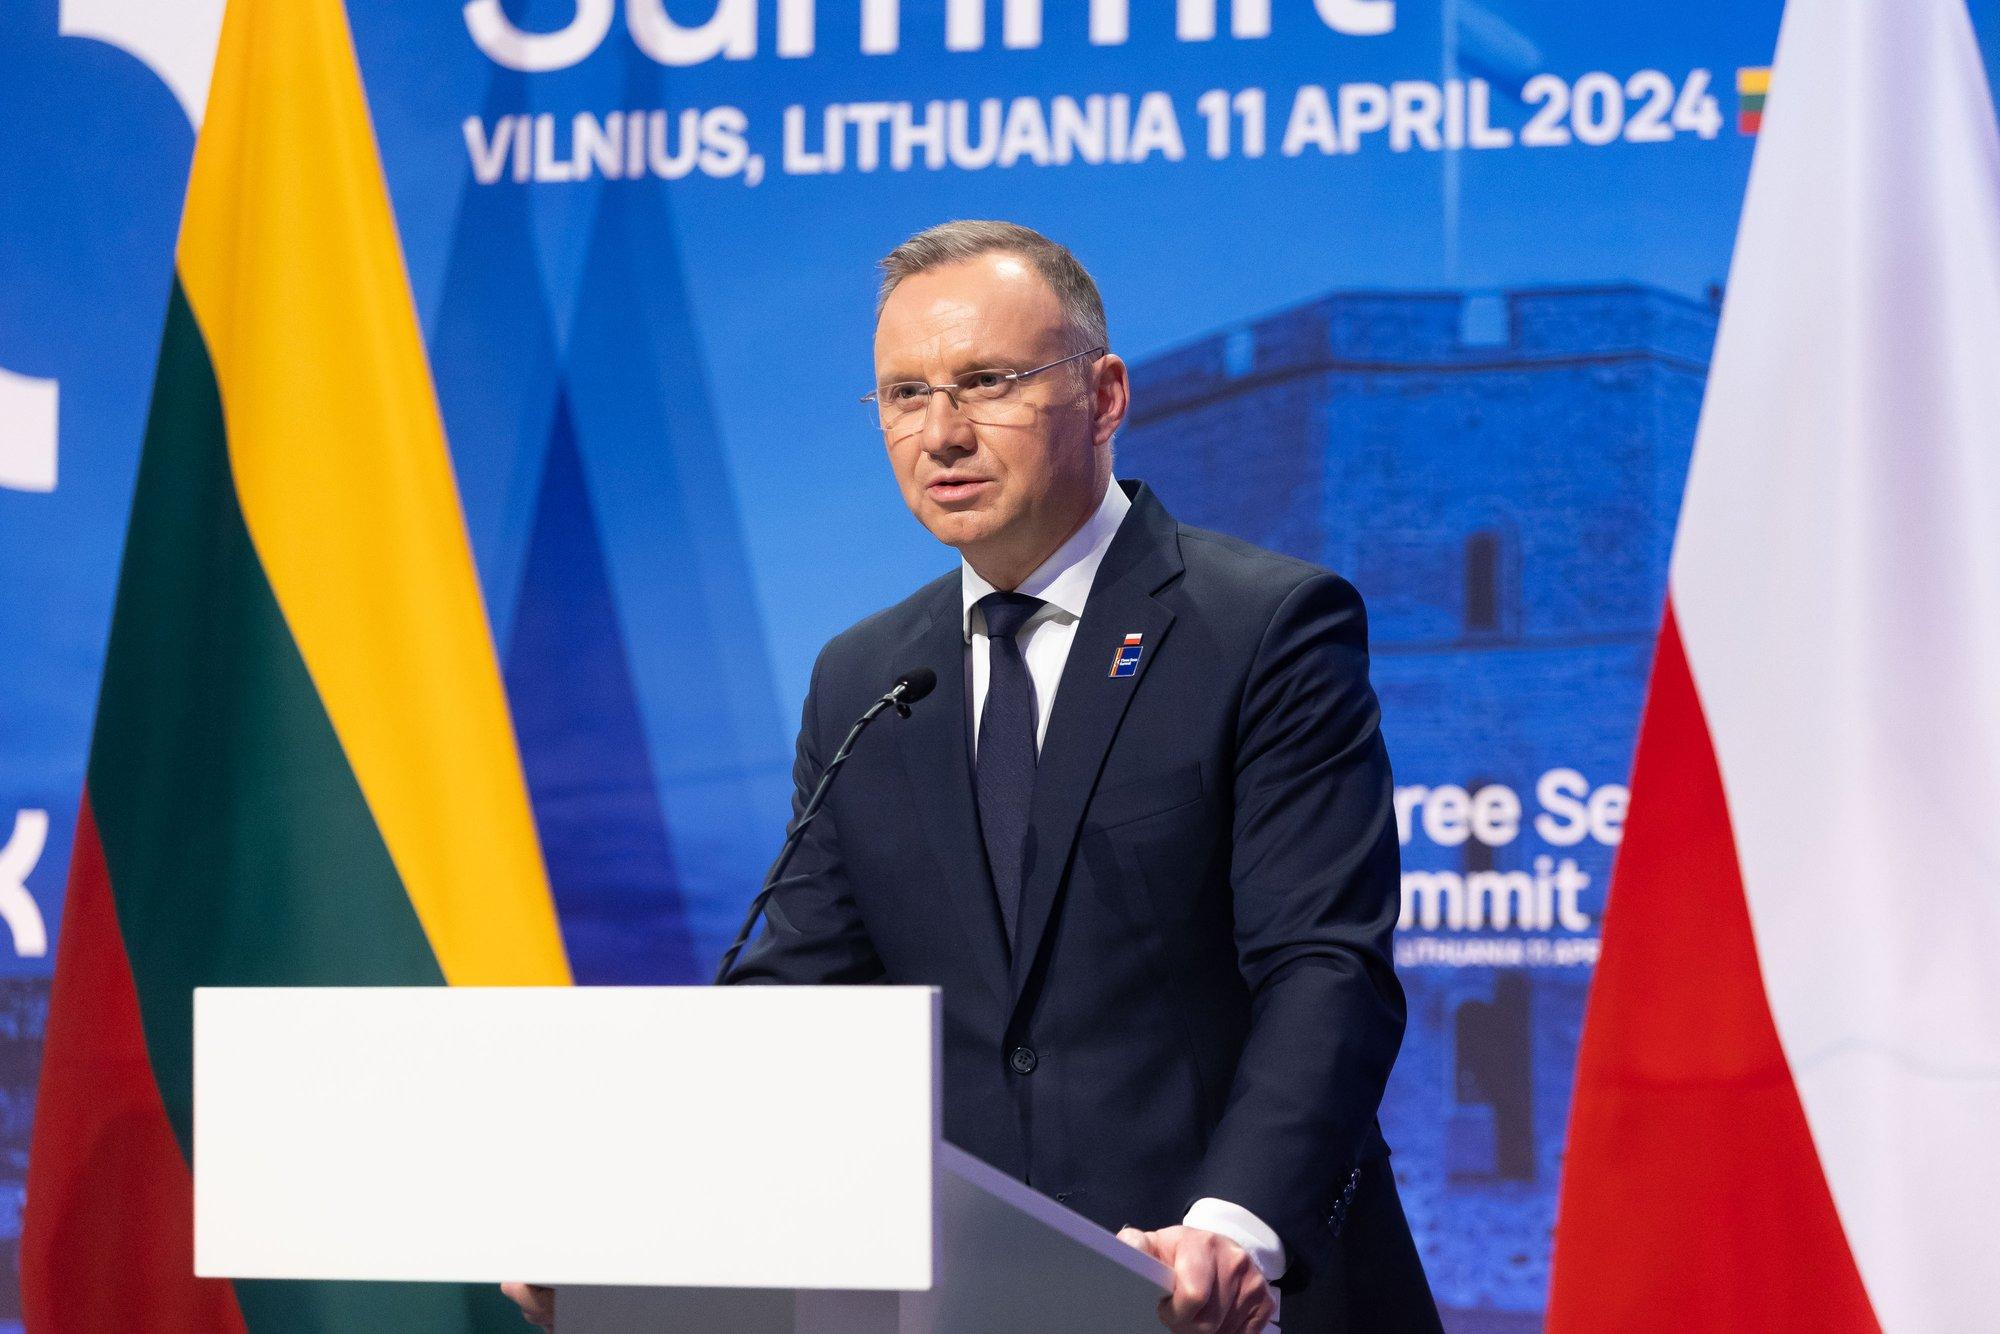 Poland’s Duda does not see Suwalki Gap as most dangerous place on earth despite threats